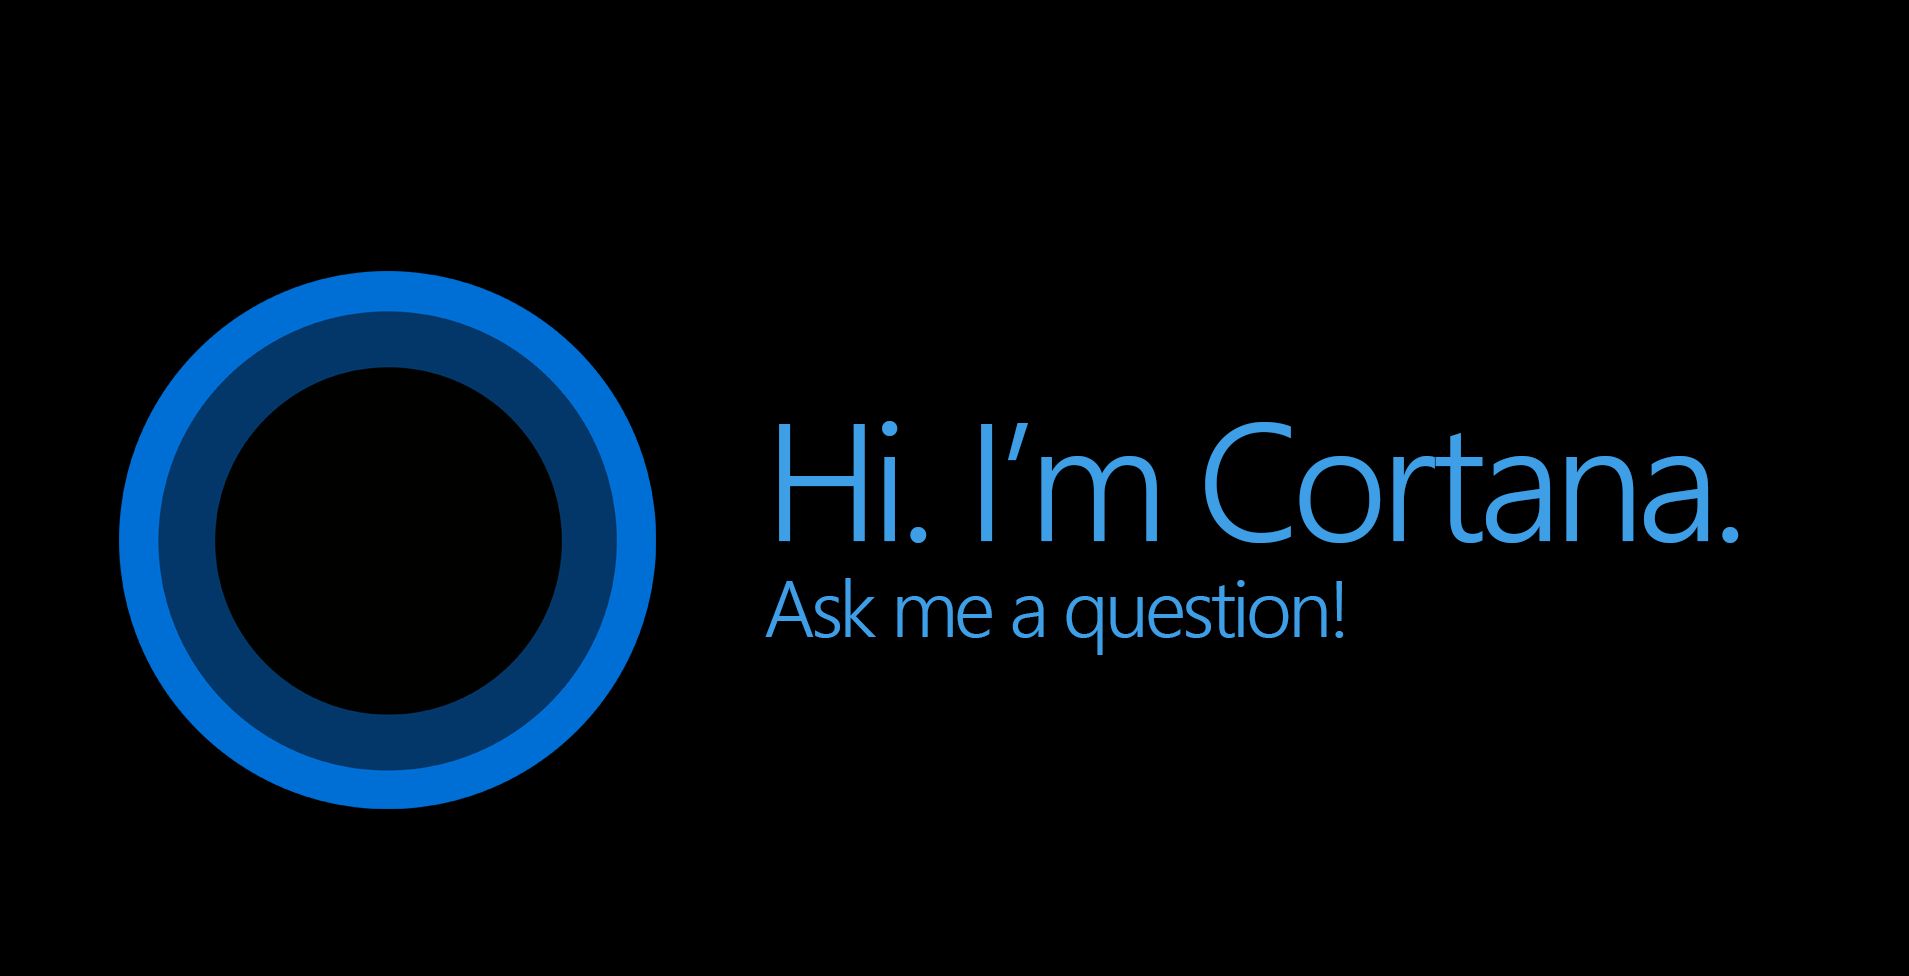 Windows 10 quick tips: Get the most out of Cortana